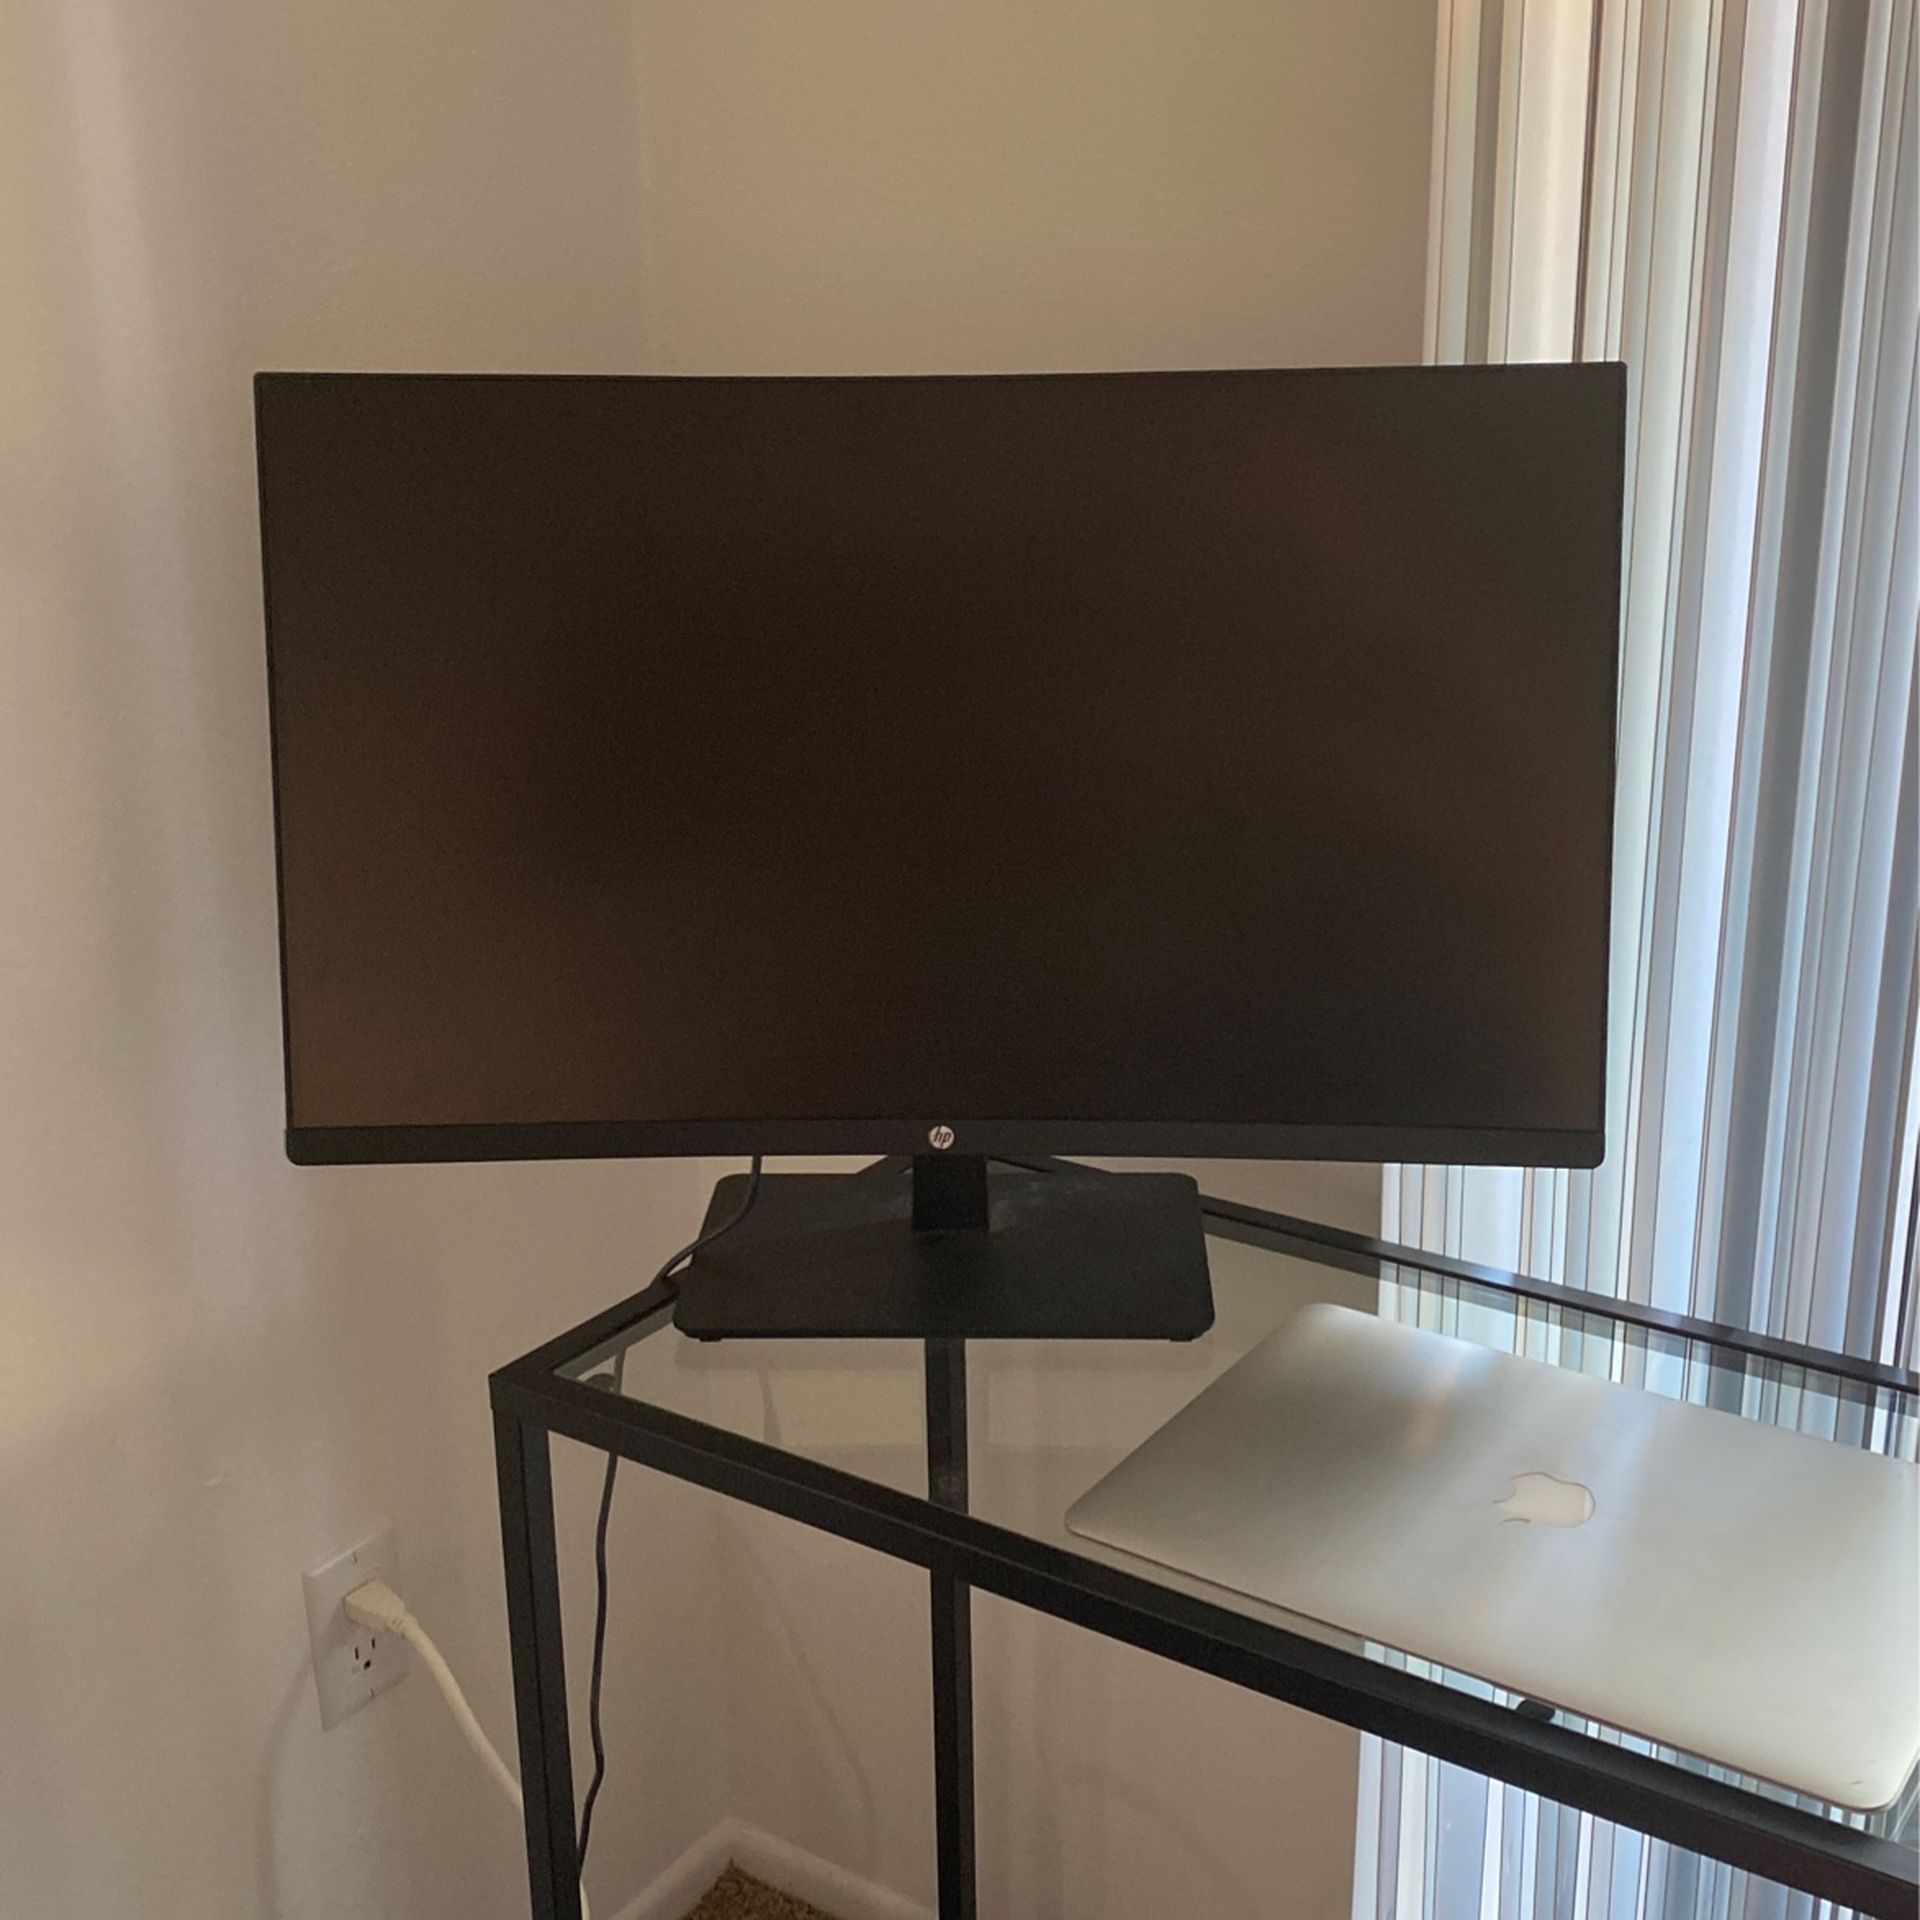 27in Curved Monitor By HP - LIKE NEW